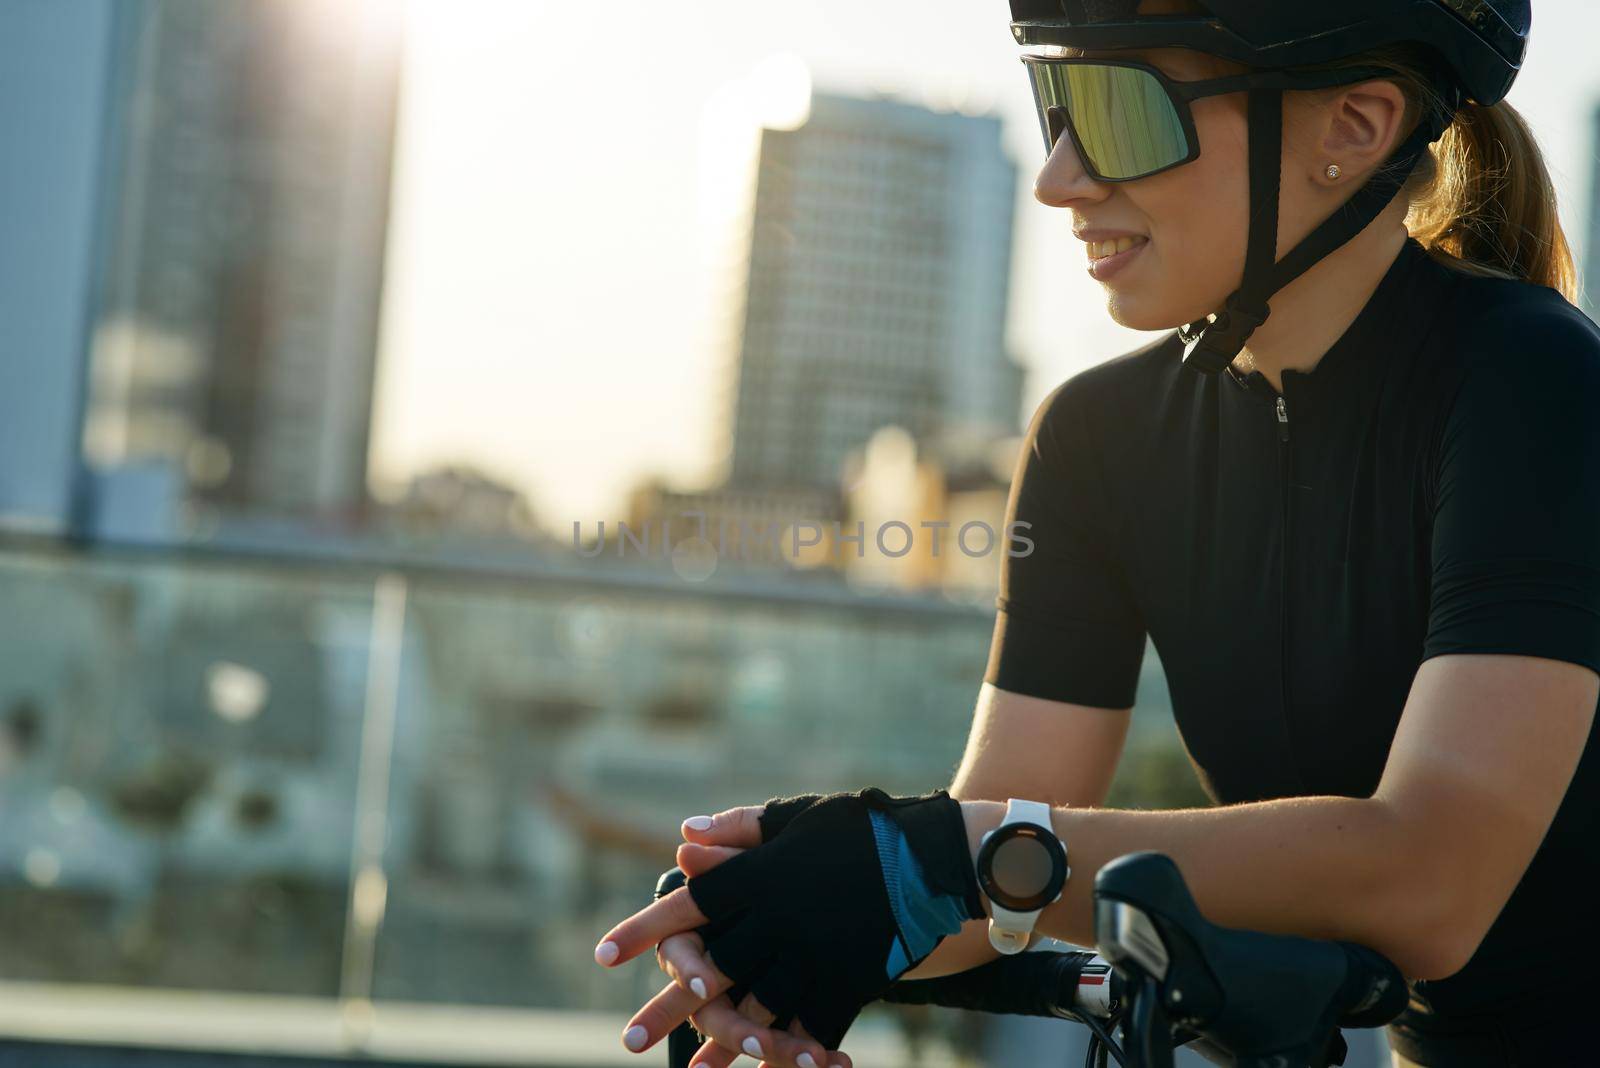 Close up portrait of joyful young sportswoman in black cycling garment and protective gear having a rest, admiring cityscape while training outdoors on a sunny day. Active lifestyle, sports concept